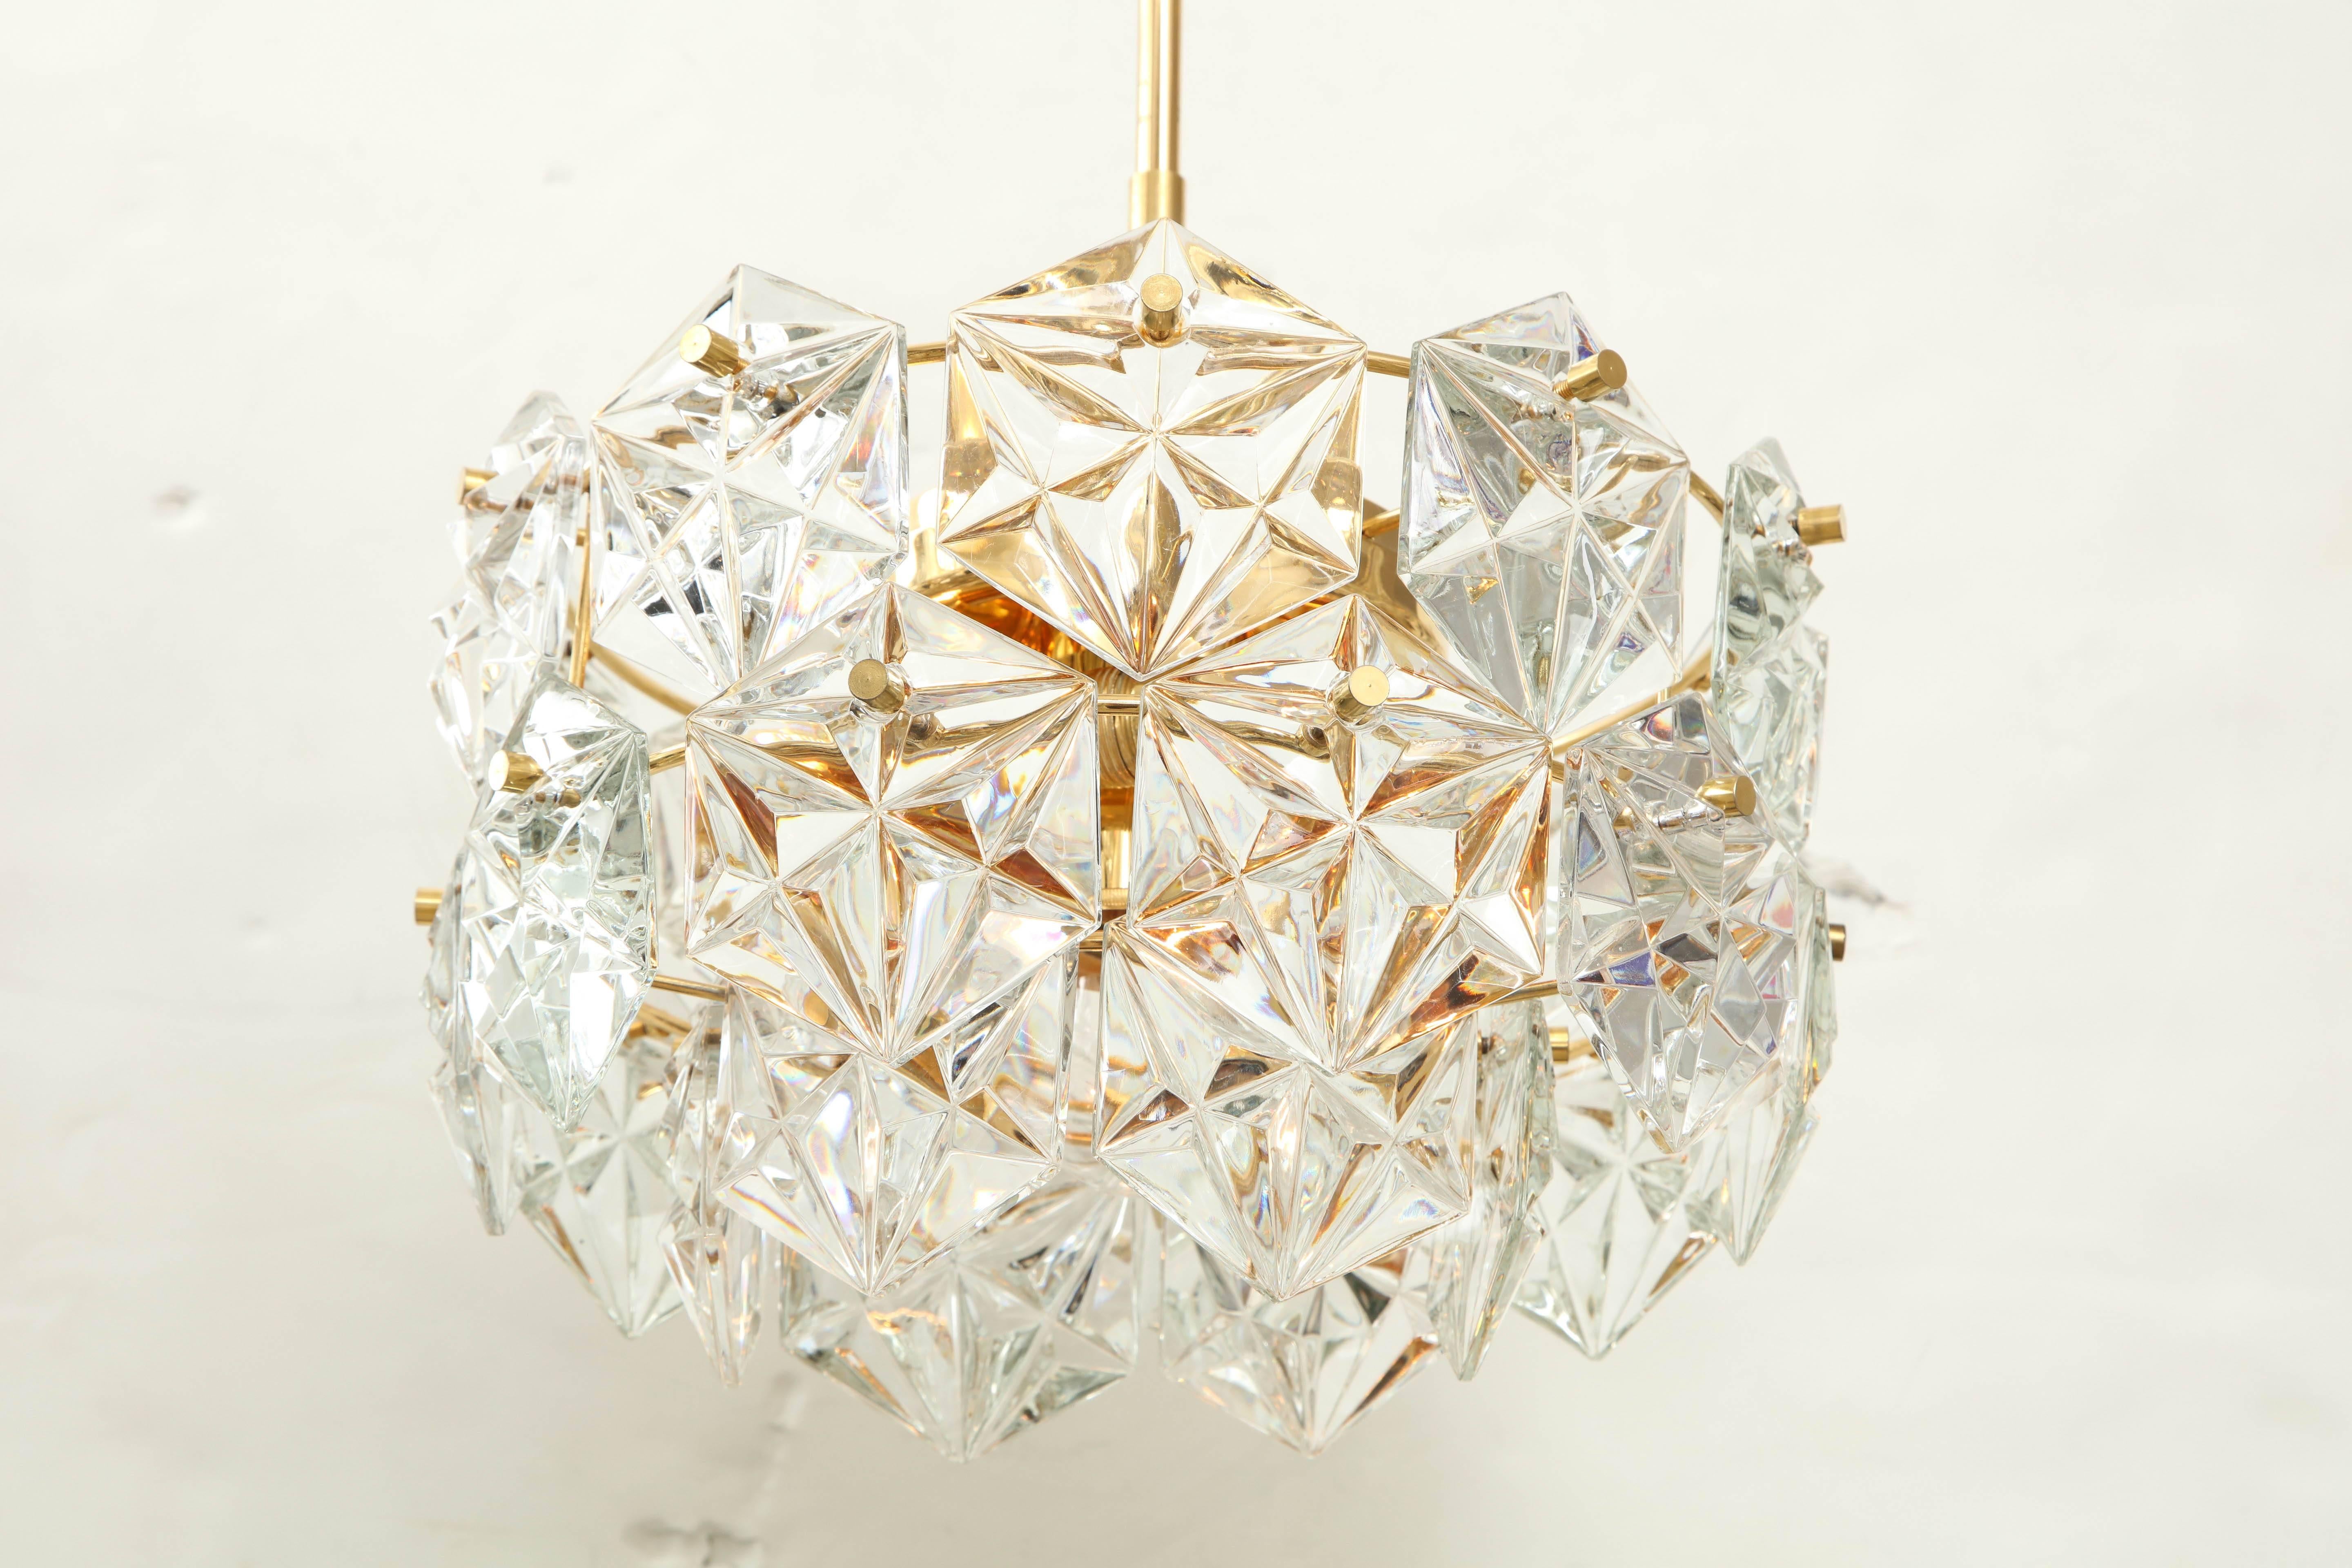 Elegant three-tiered faceted crystal chandelier by Kinkeldey.
The 22-karat gold-plated fixture supports three rings of Hexagonal faceted crystal prisms that glisten when illuminated.
The fixture has been newly rewired and comes complete with a 12